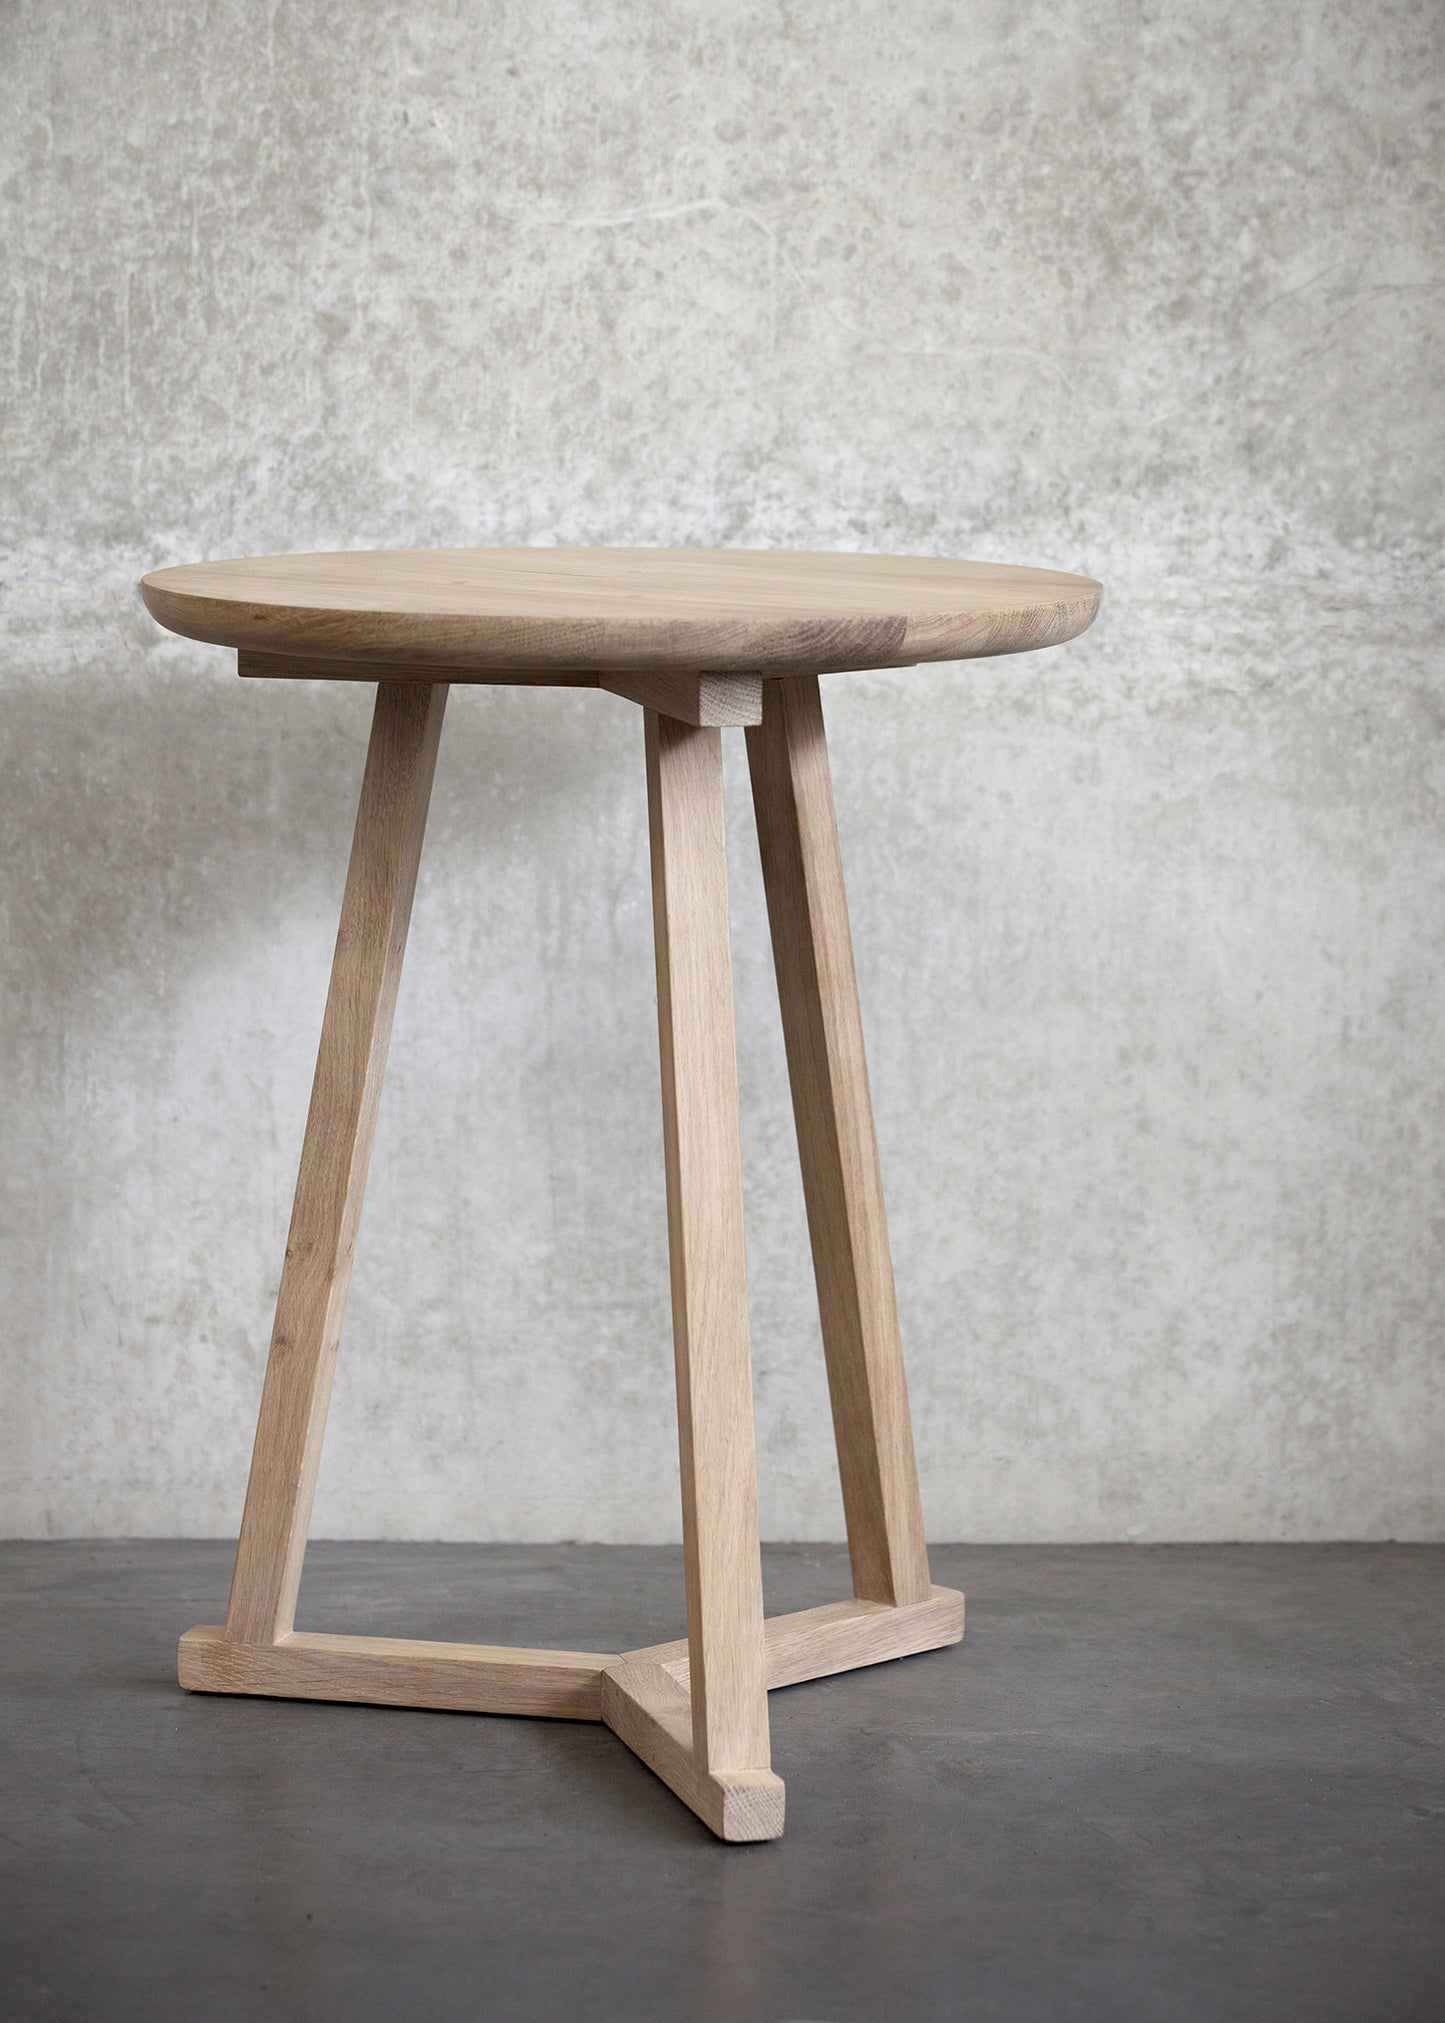 Ethnicraft Oak Tripod Side Table available from Make Your House A Home, Bendigo, Victoria, Australia